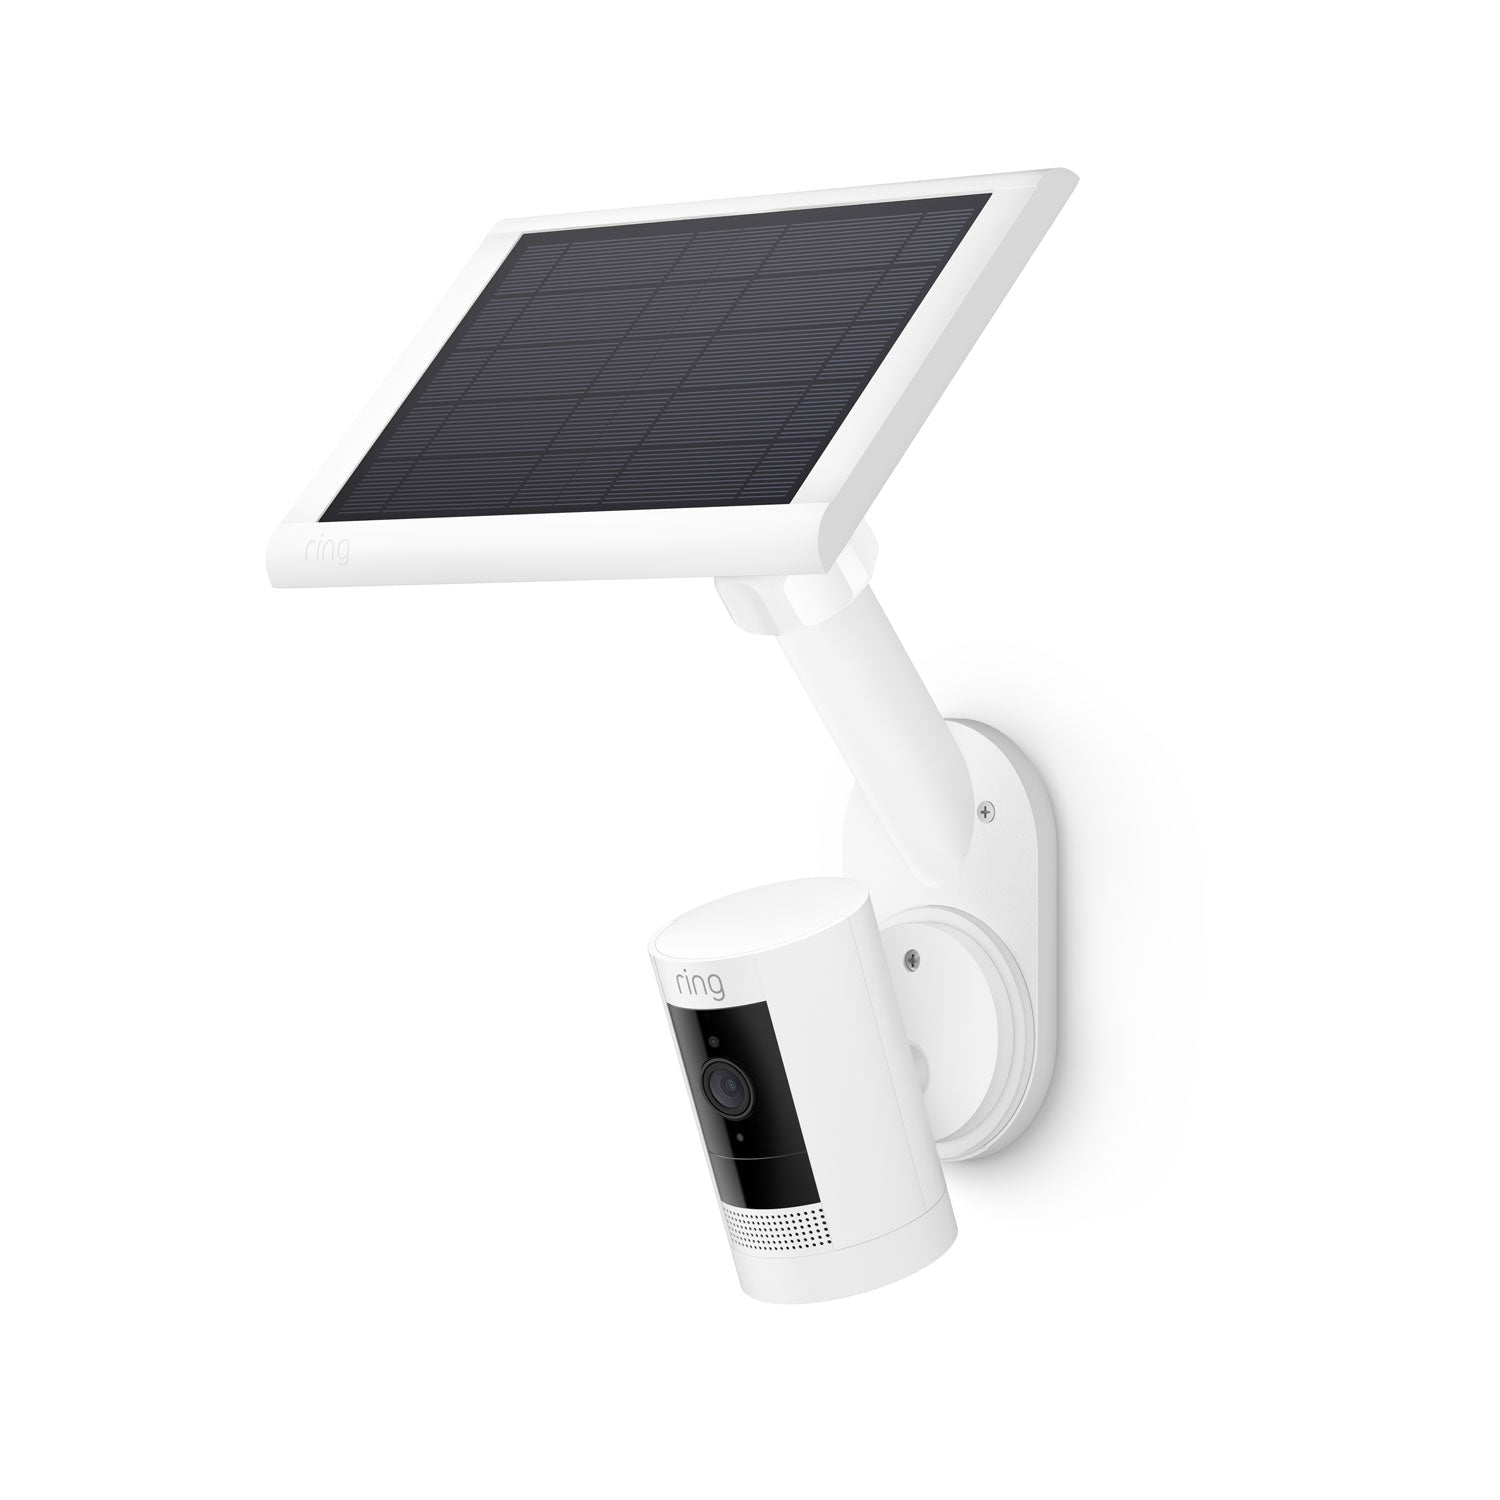 Wall Mount for Solar Panels and Cams - Wall Mount for Solar Panels and Cams in white with Stick Up Cam attached.